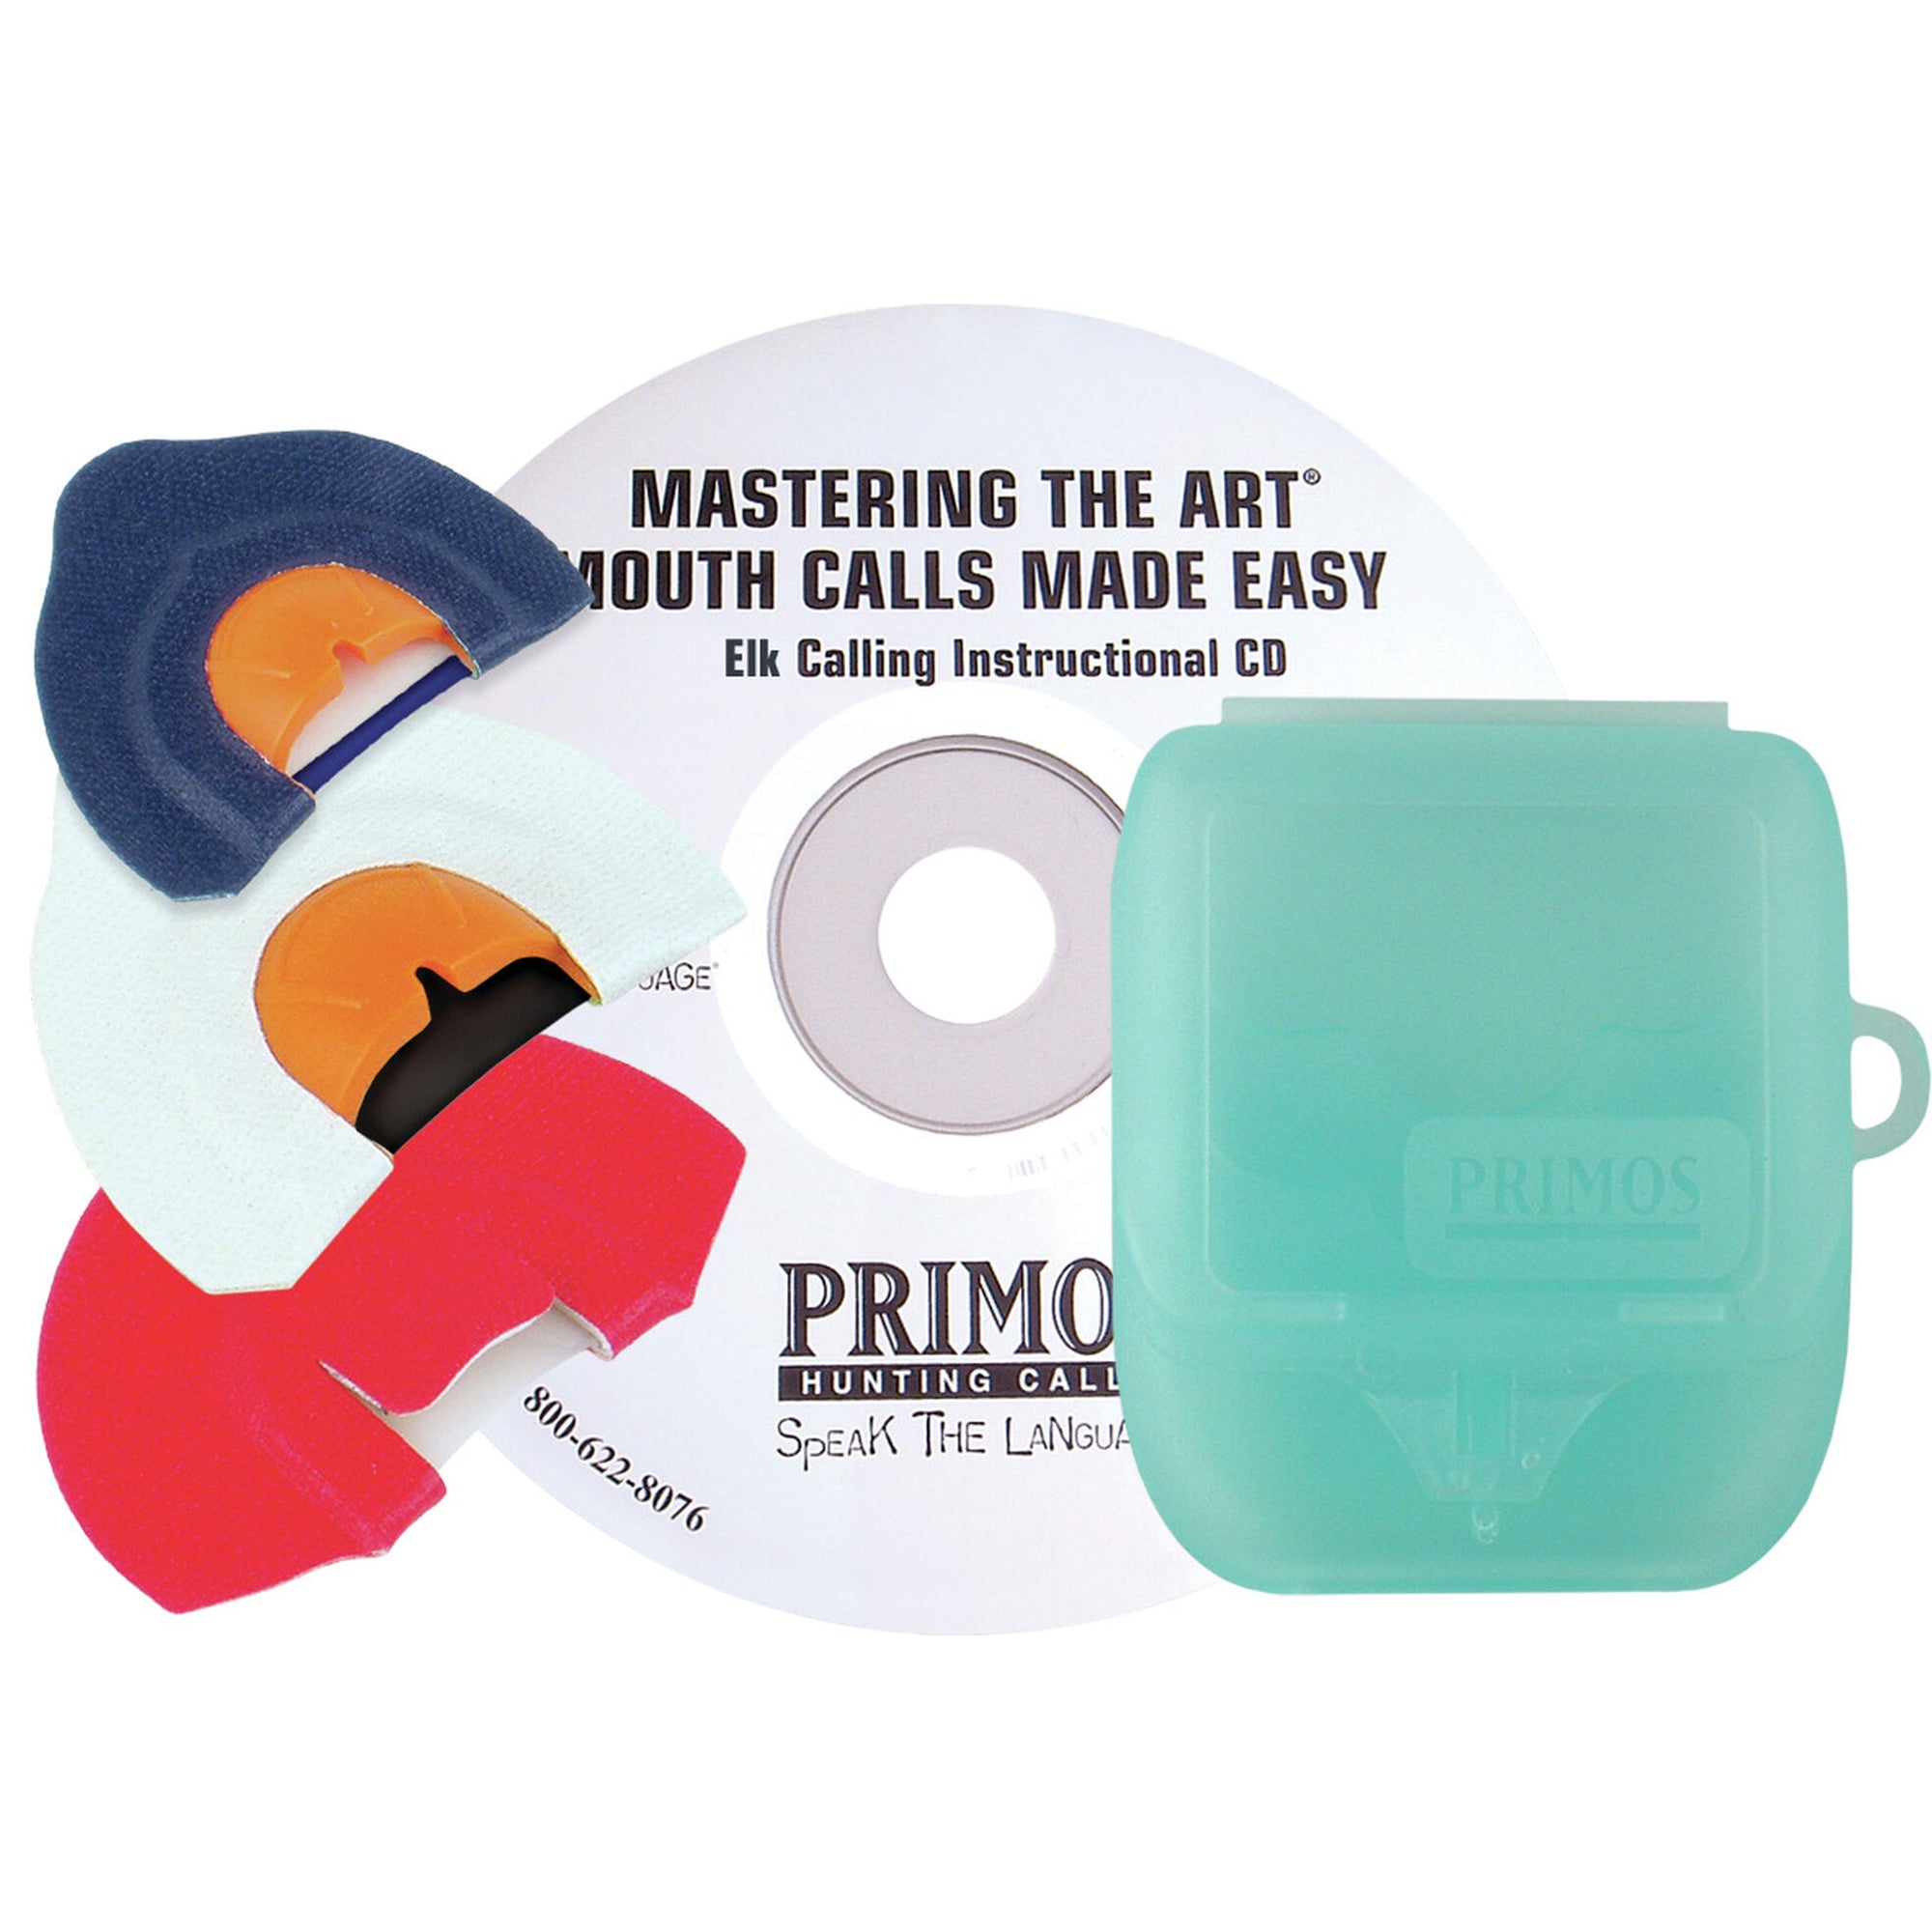 Primos Hunting Sonic Dome Elk Calls with Mouth Call Made Easy CD Primos